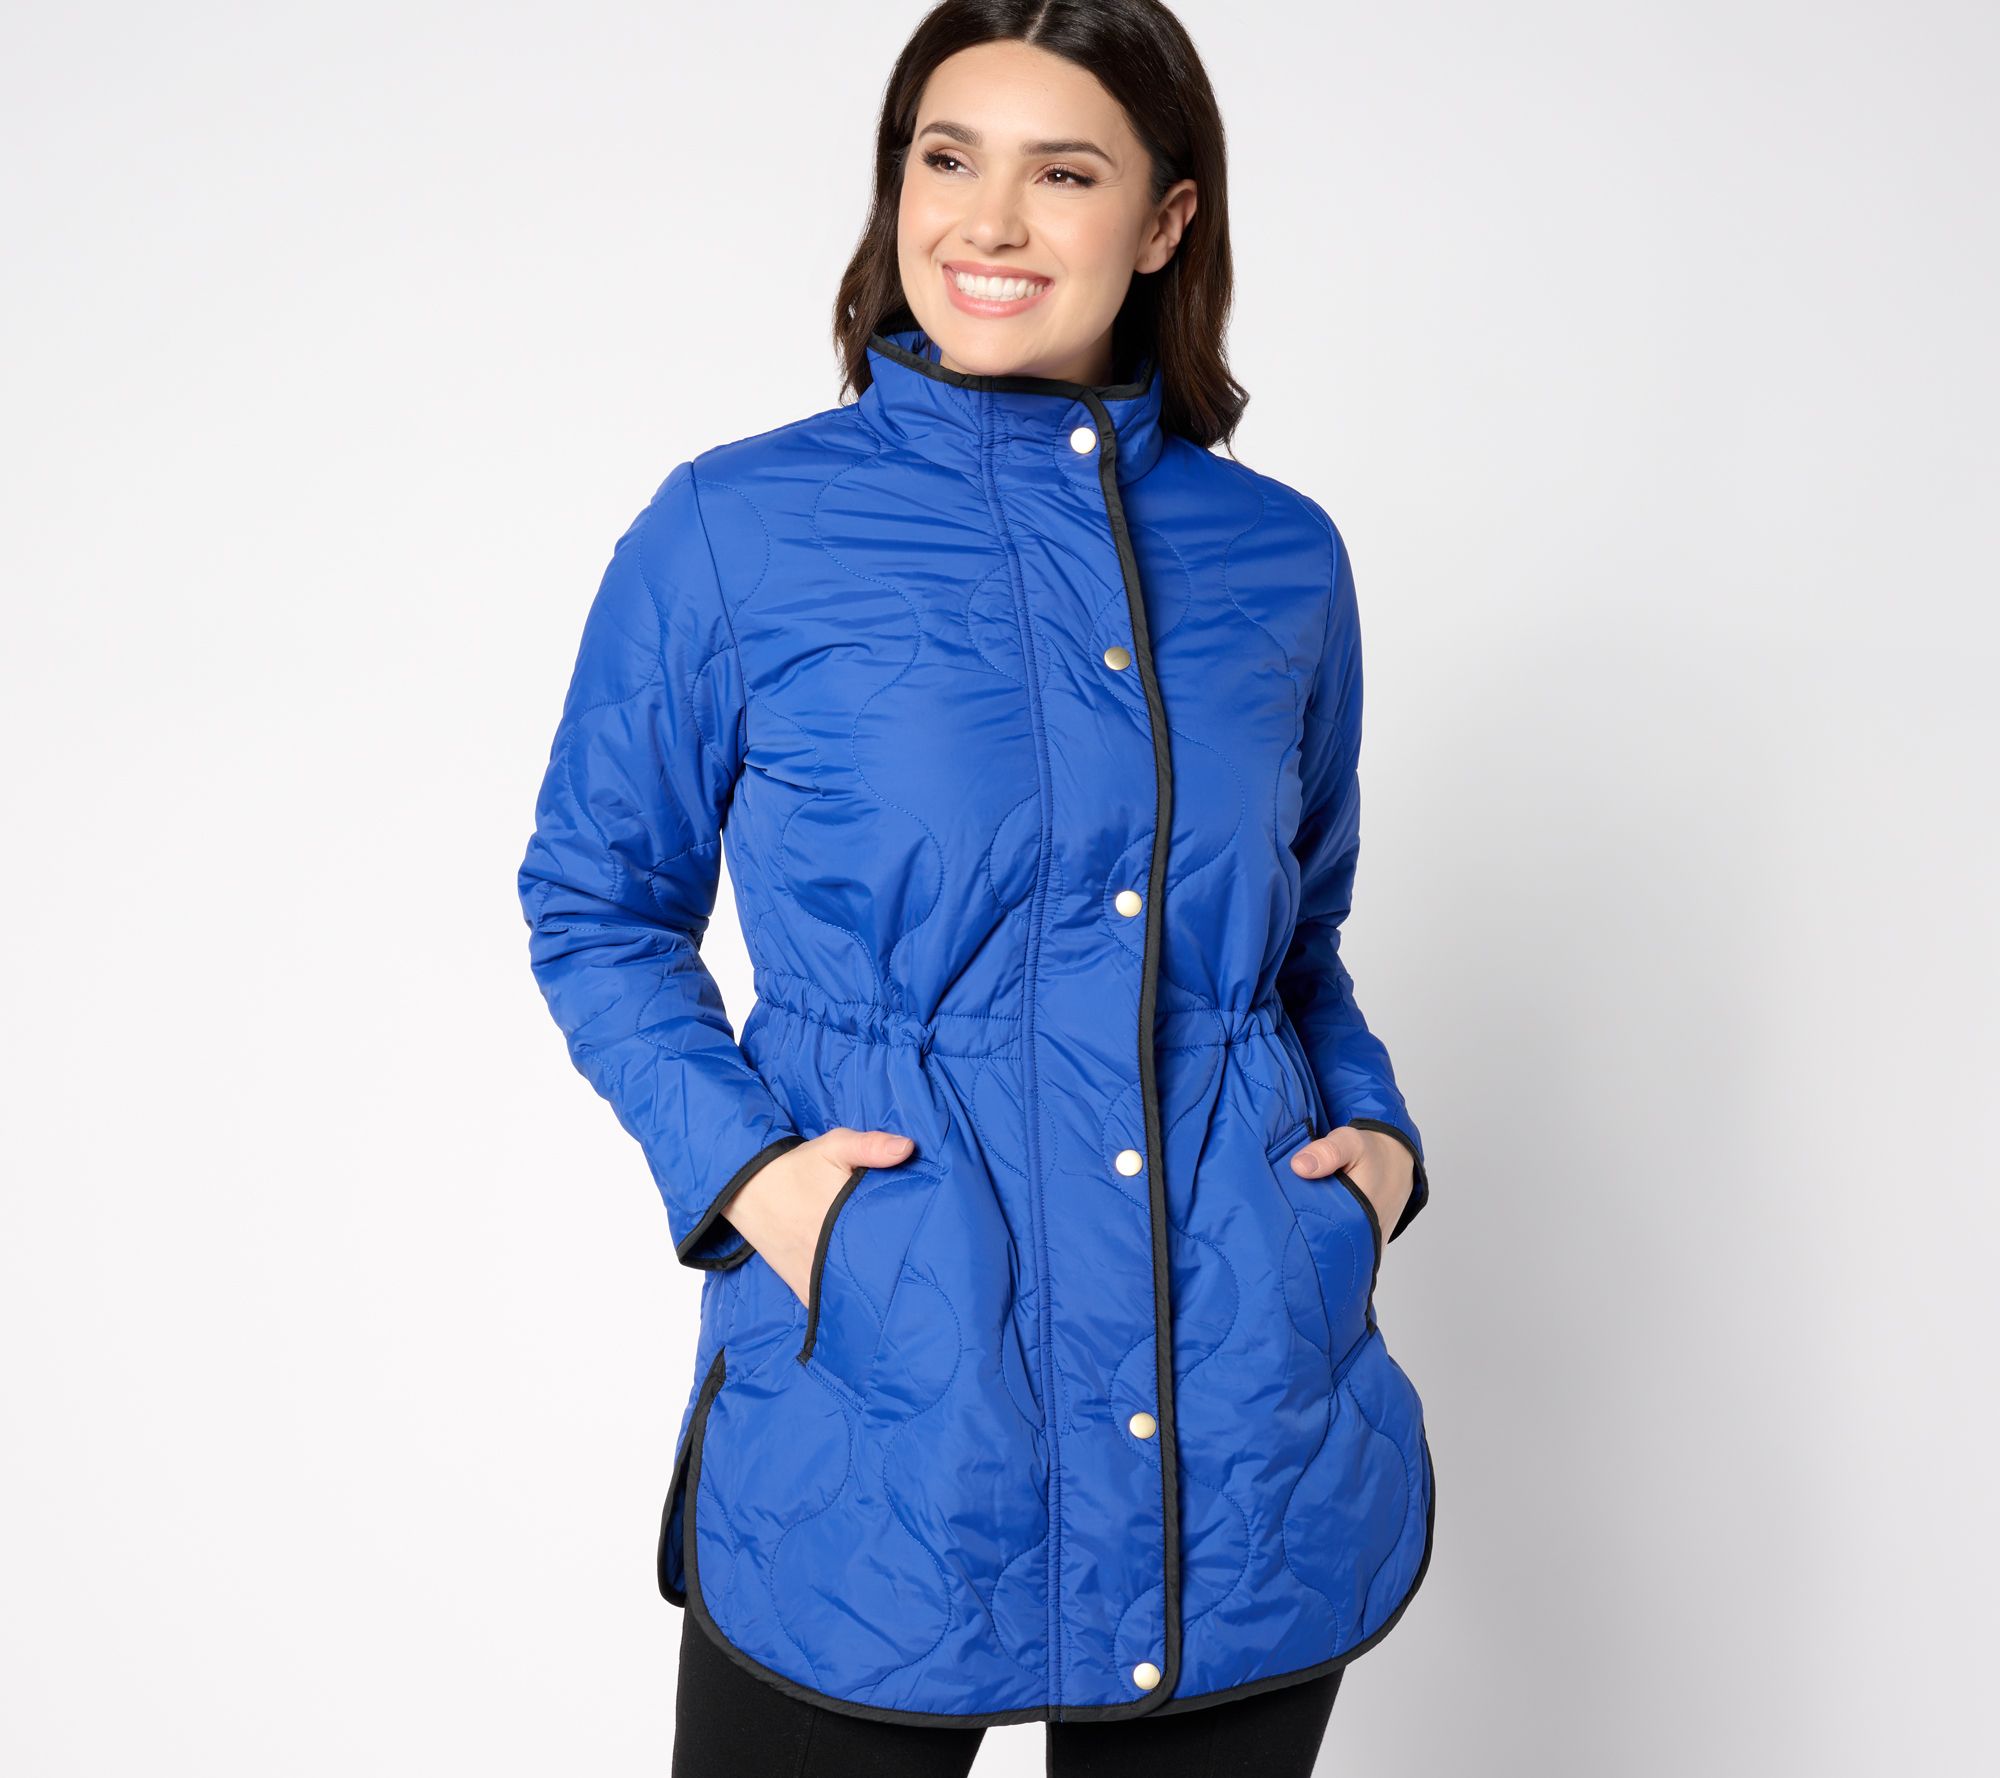 Denim & Co. Heritage Quilted Jacket with Anorak Waist